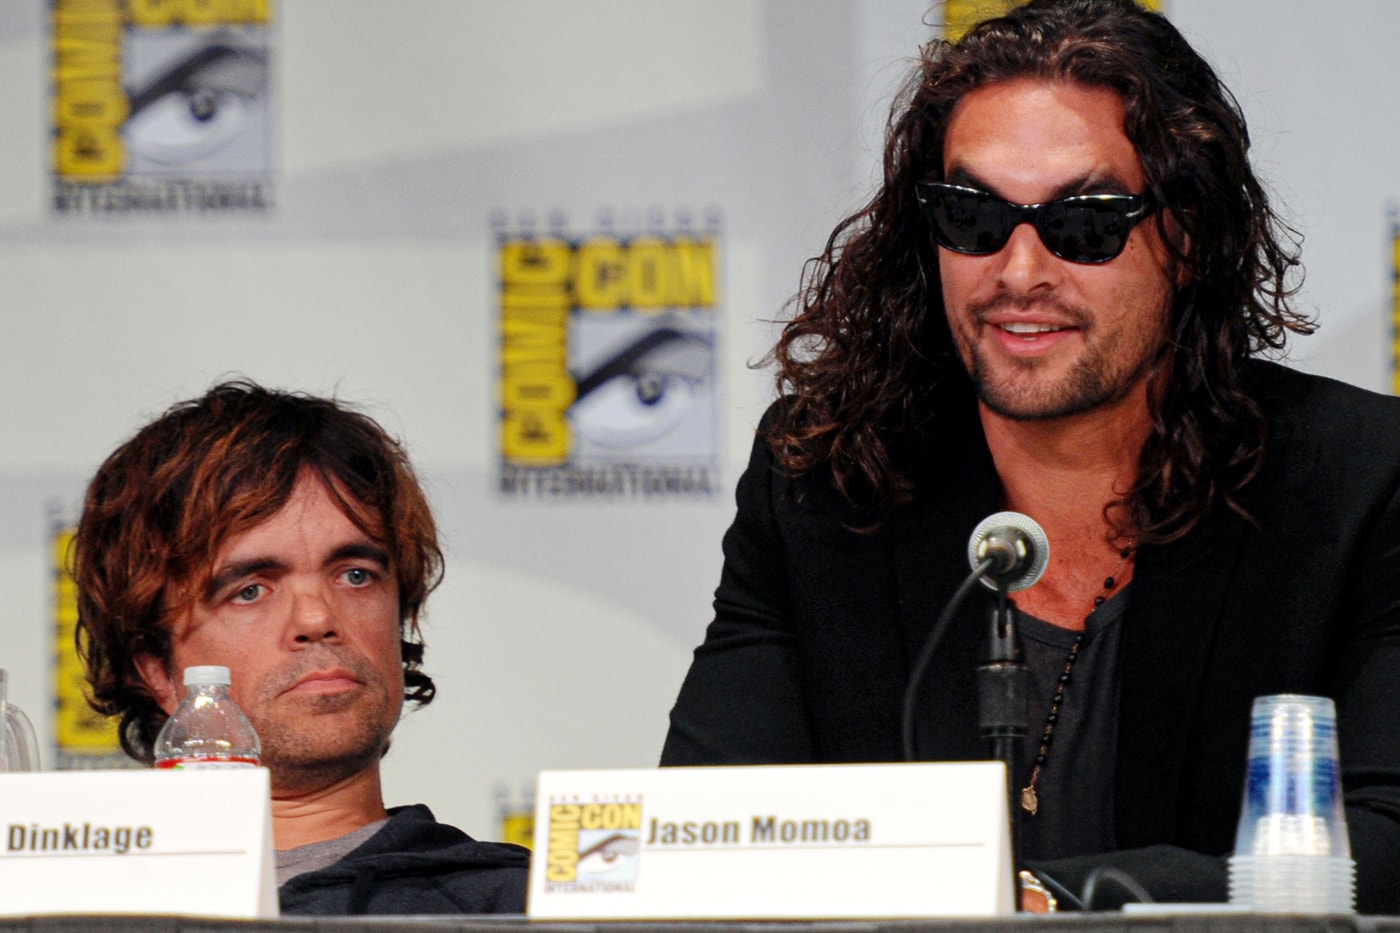 Peter Dinklage Jason Momoa Good Bad Undead movies films entertainment news production the legendary vampire hunter slayer con scam artists